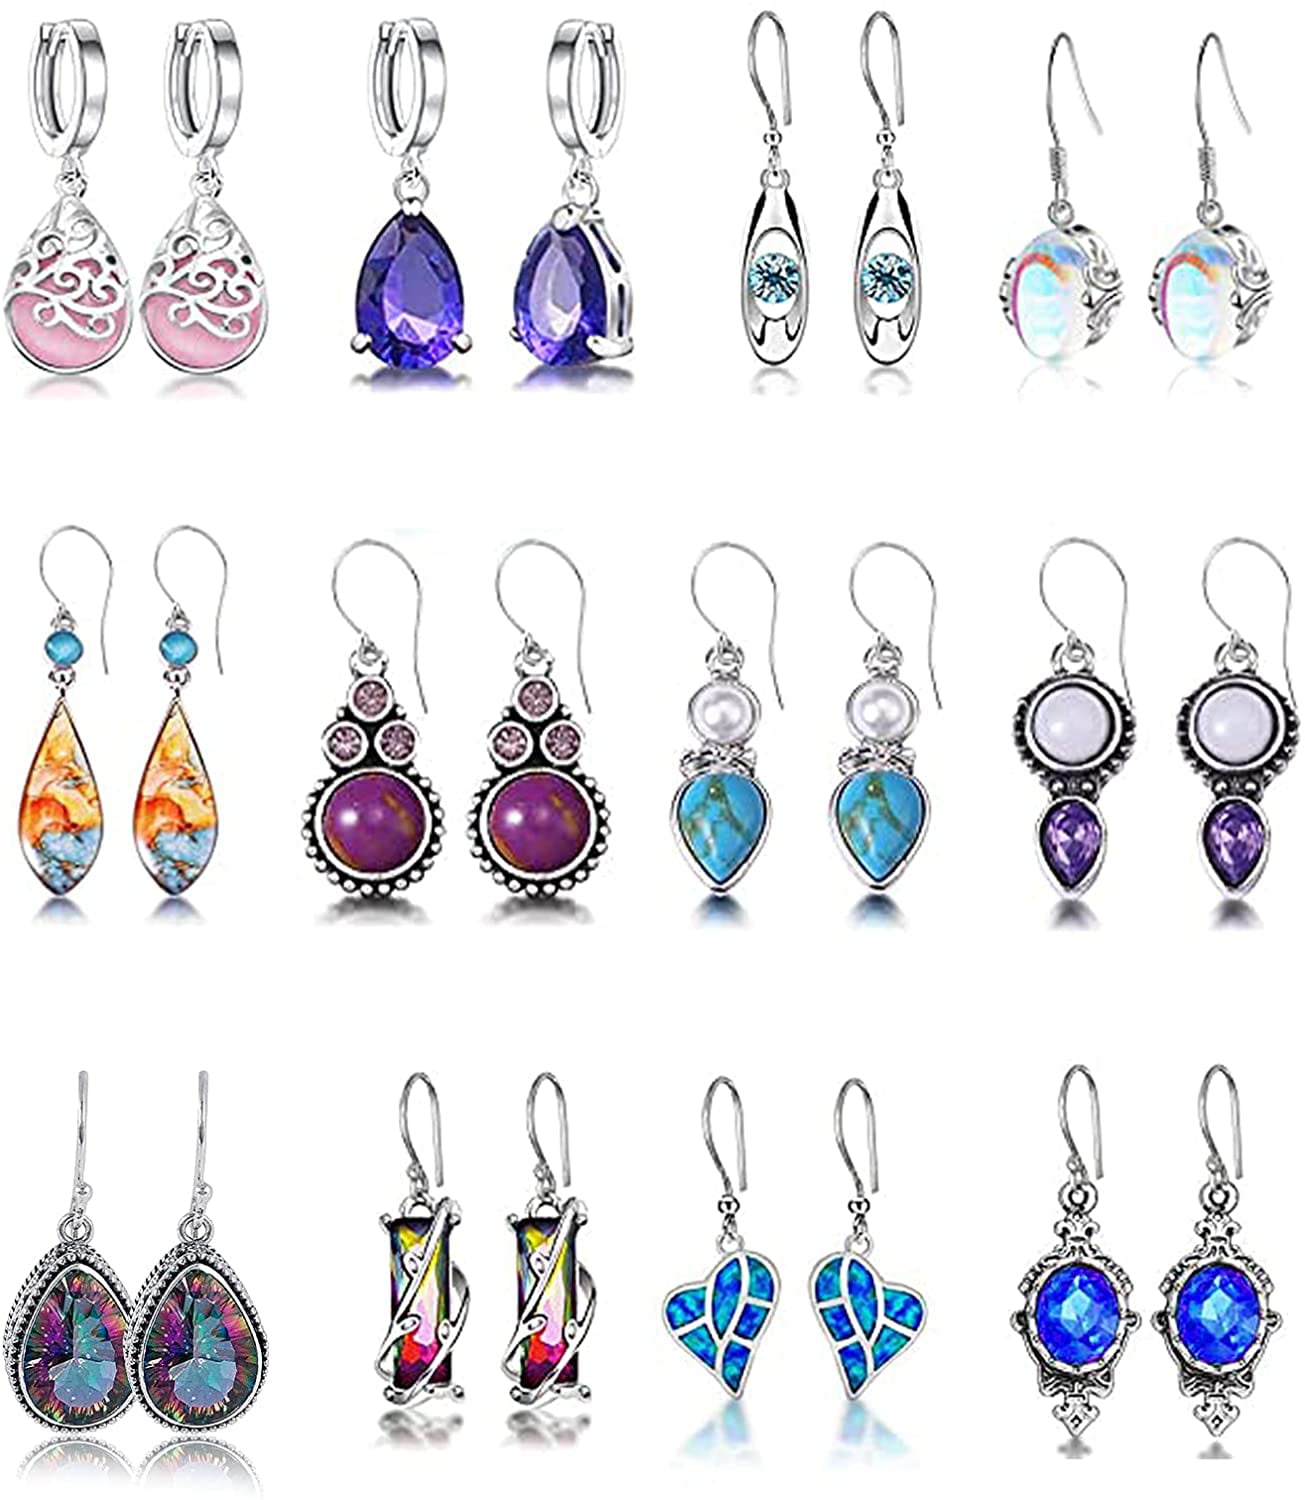 6 Teardrop Charms Silver Assorted Earring Drops Acrylic Bezeled Jewels Pairs 